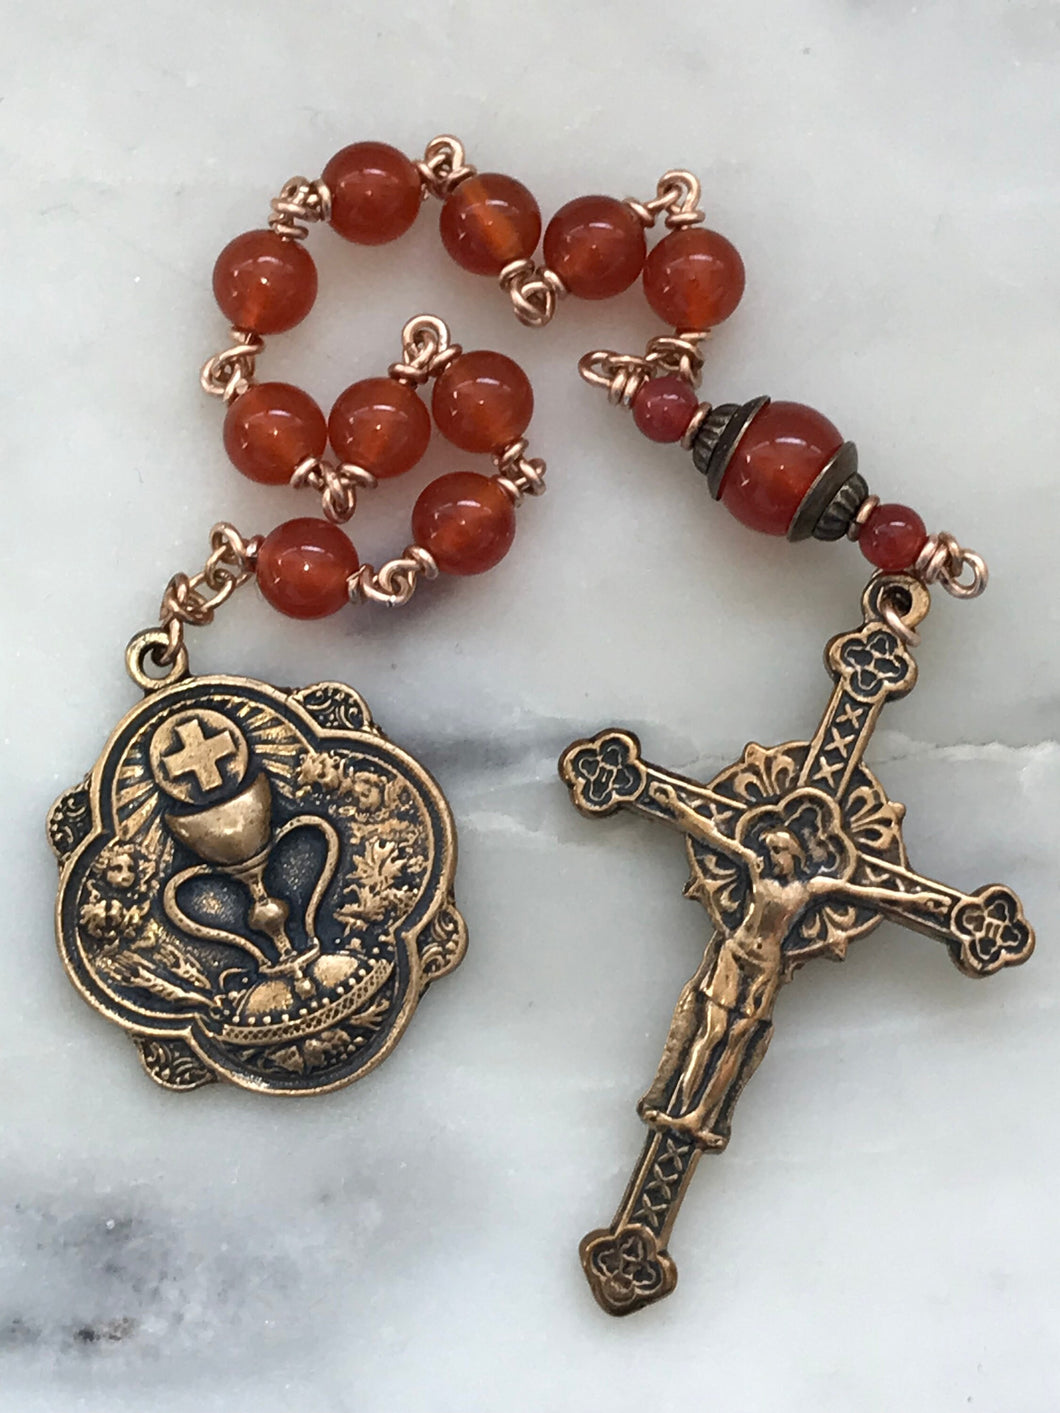 Orange Pocket Rosary - First Communion Tenner - Carnelian and Bronze - Single Decade Rosary CeCeAgnes